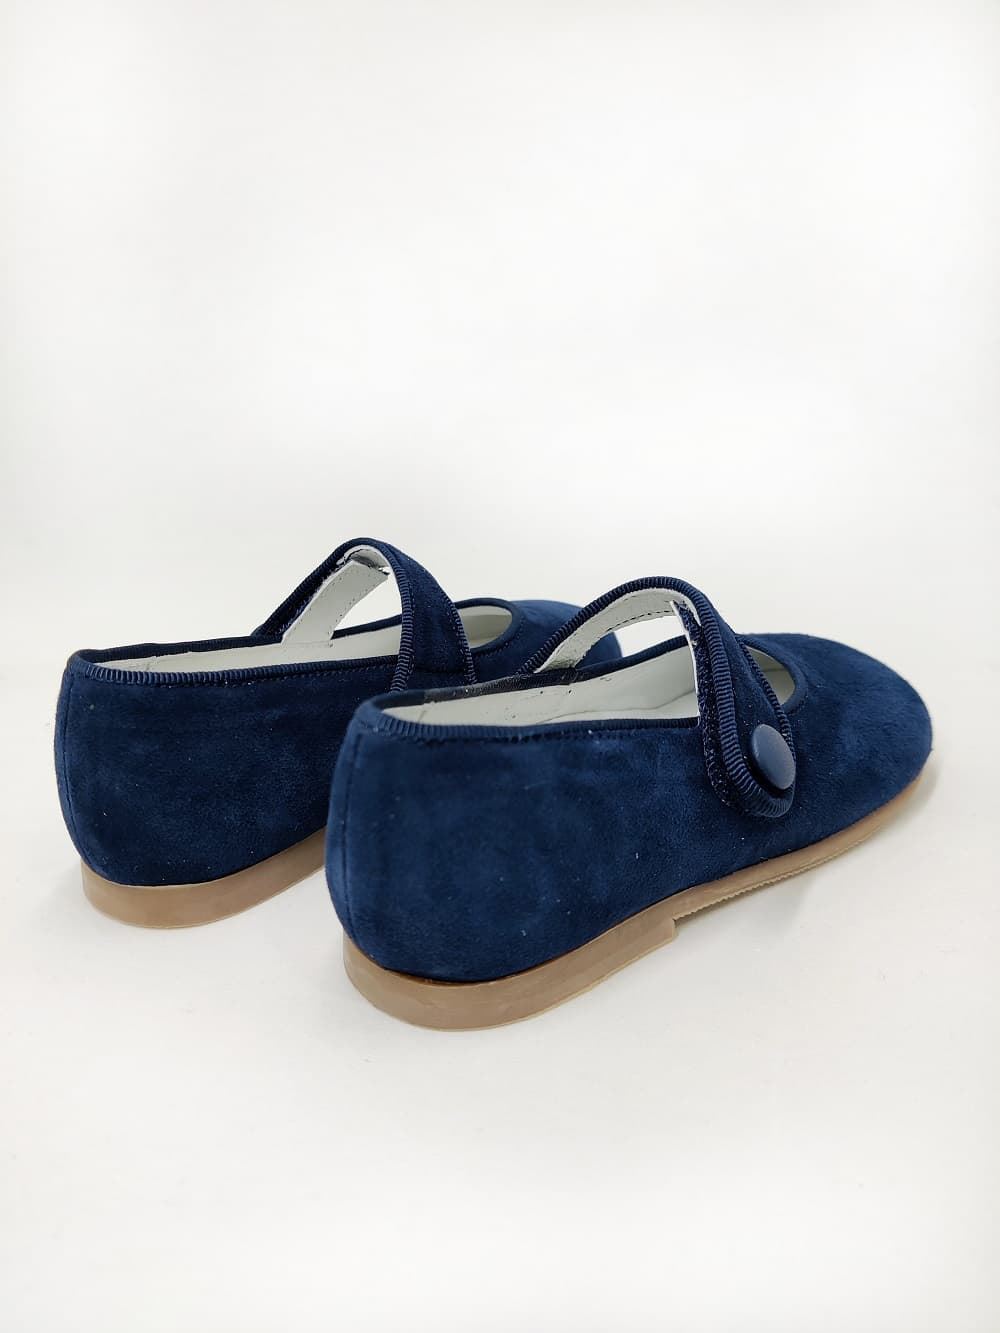 Pirufin Mary Janes for baby girls in Navy Blue suede - Image 3